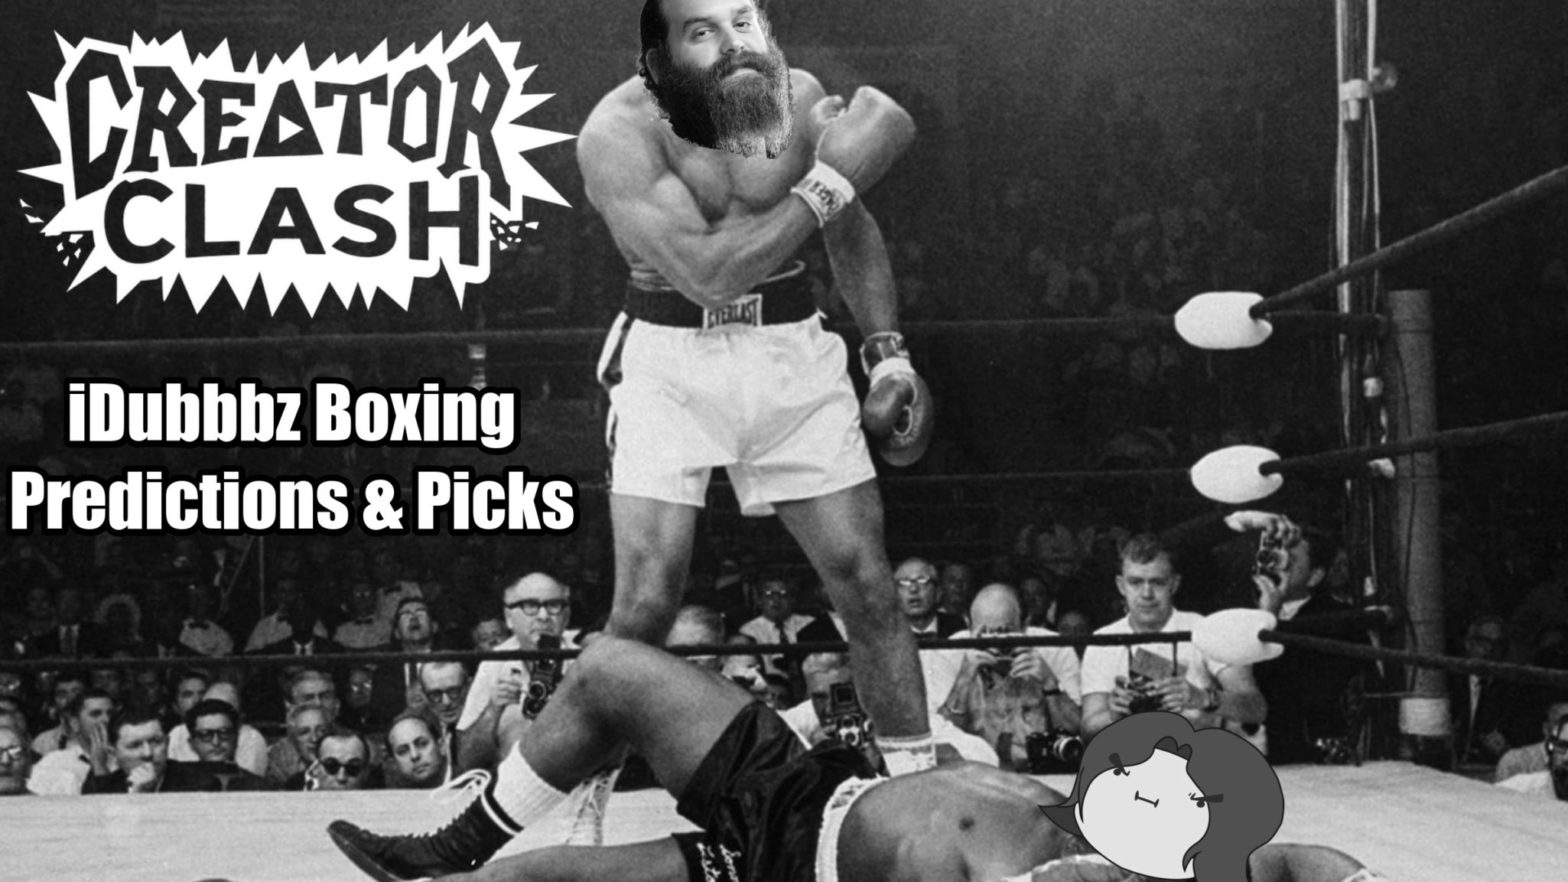 Creator Clash: Picks and Predictions for the iDubbbz' boxing event